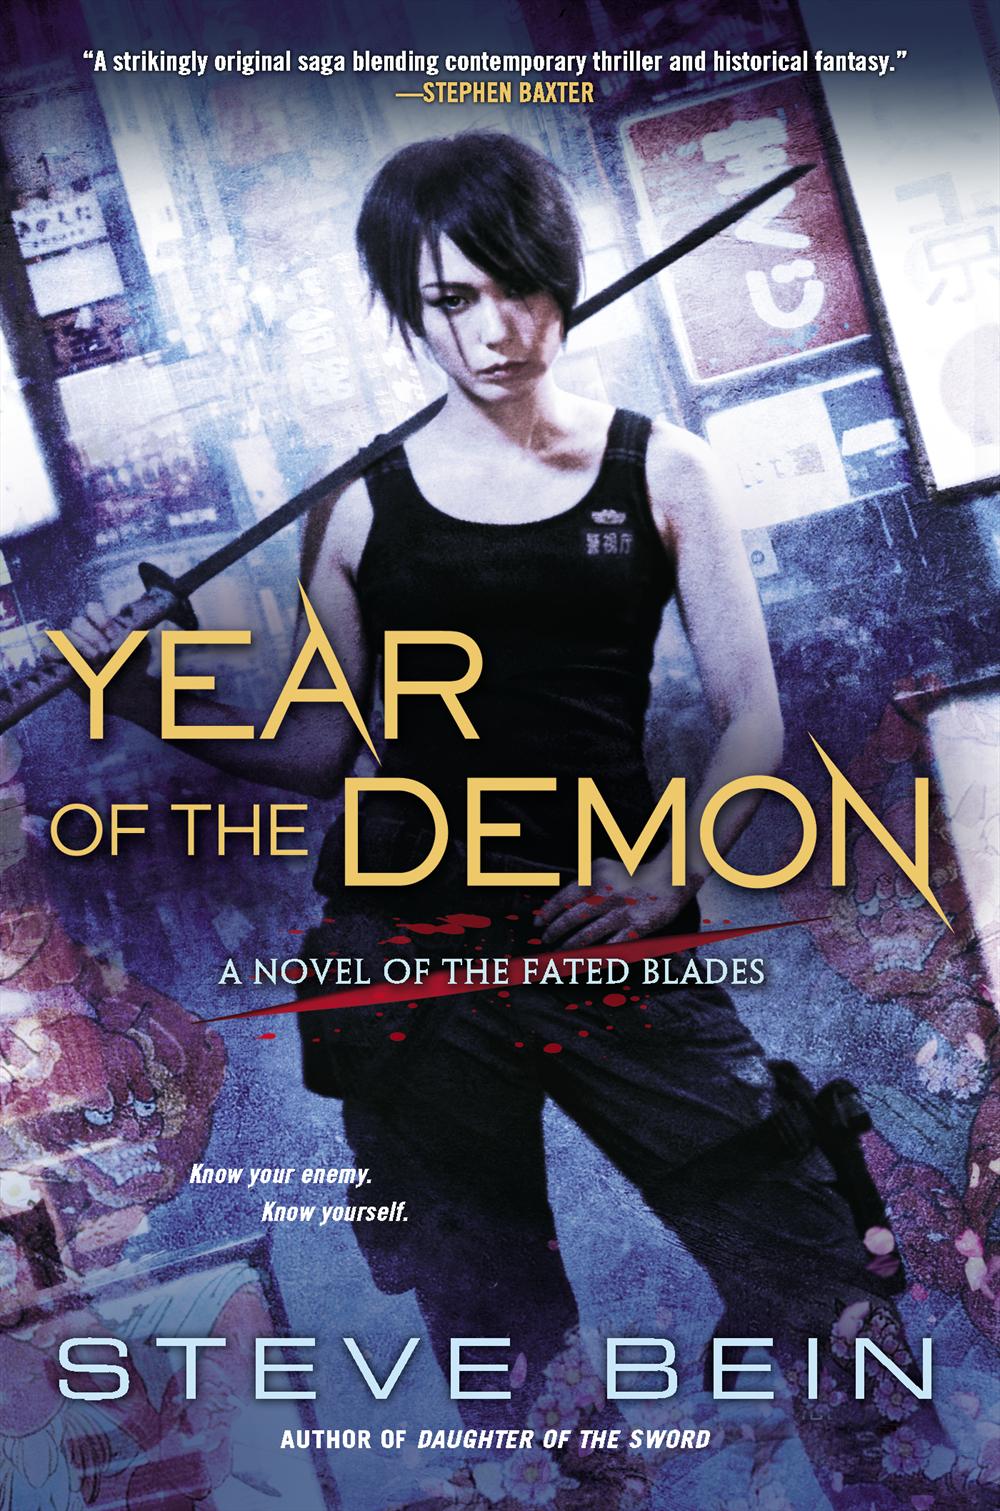 Year of the Demon